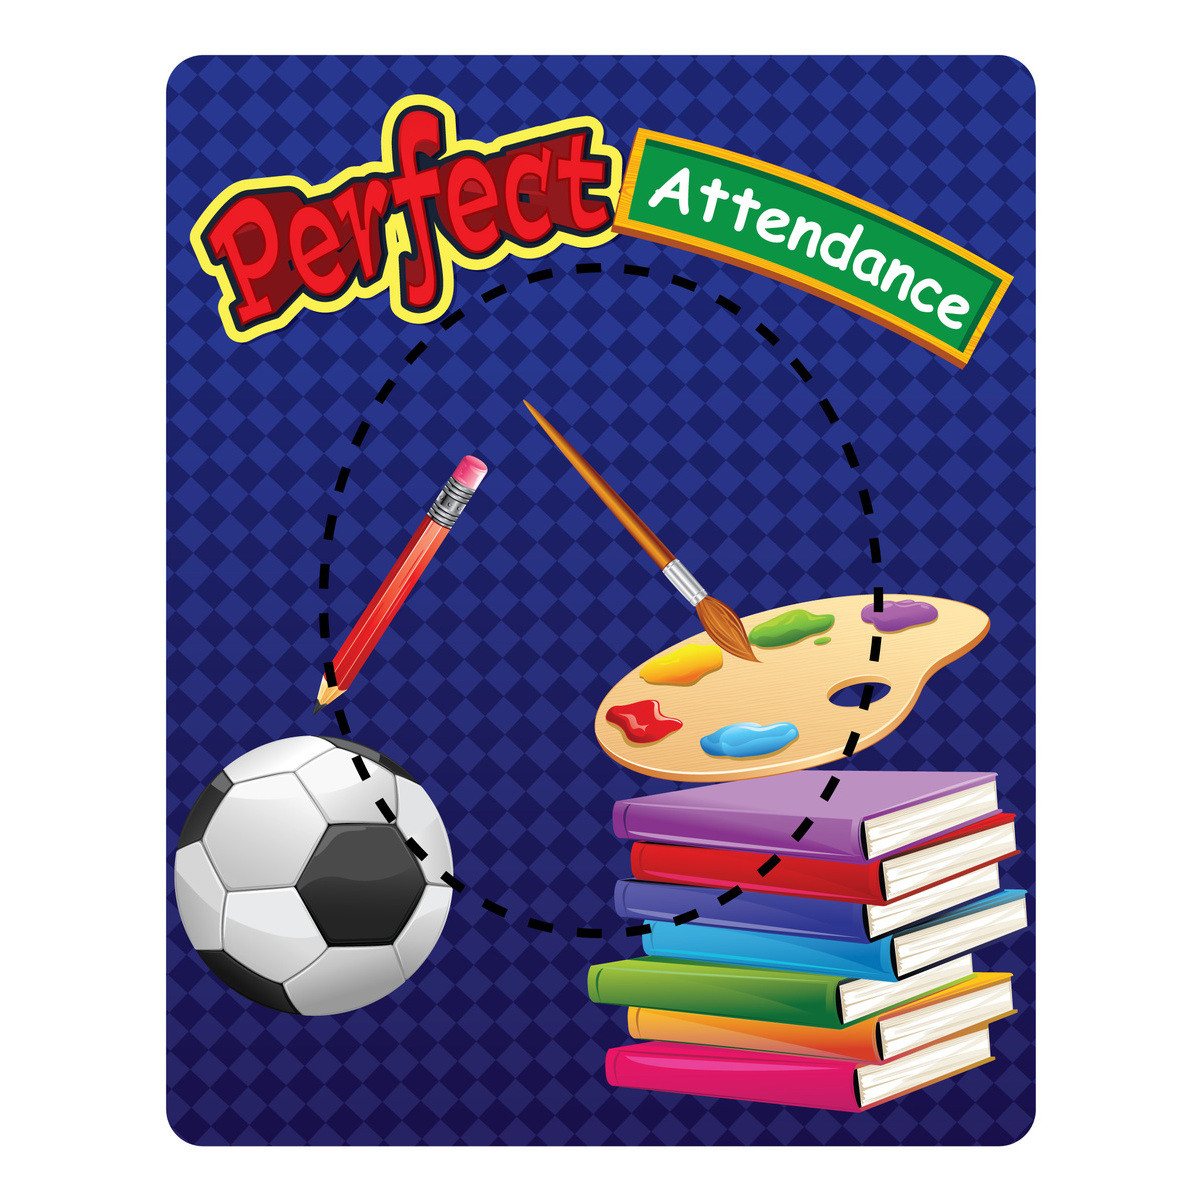 Picture Frame Magnet- Perfect Attendance